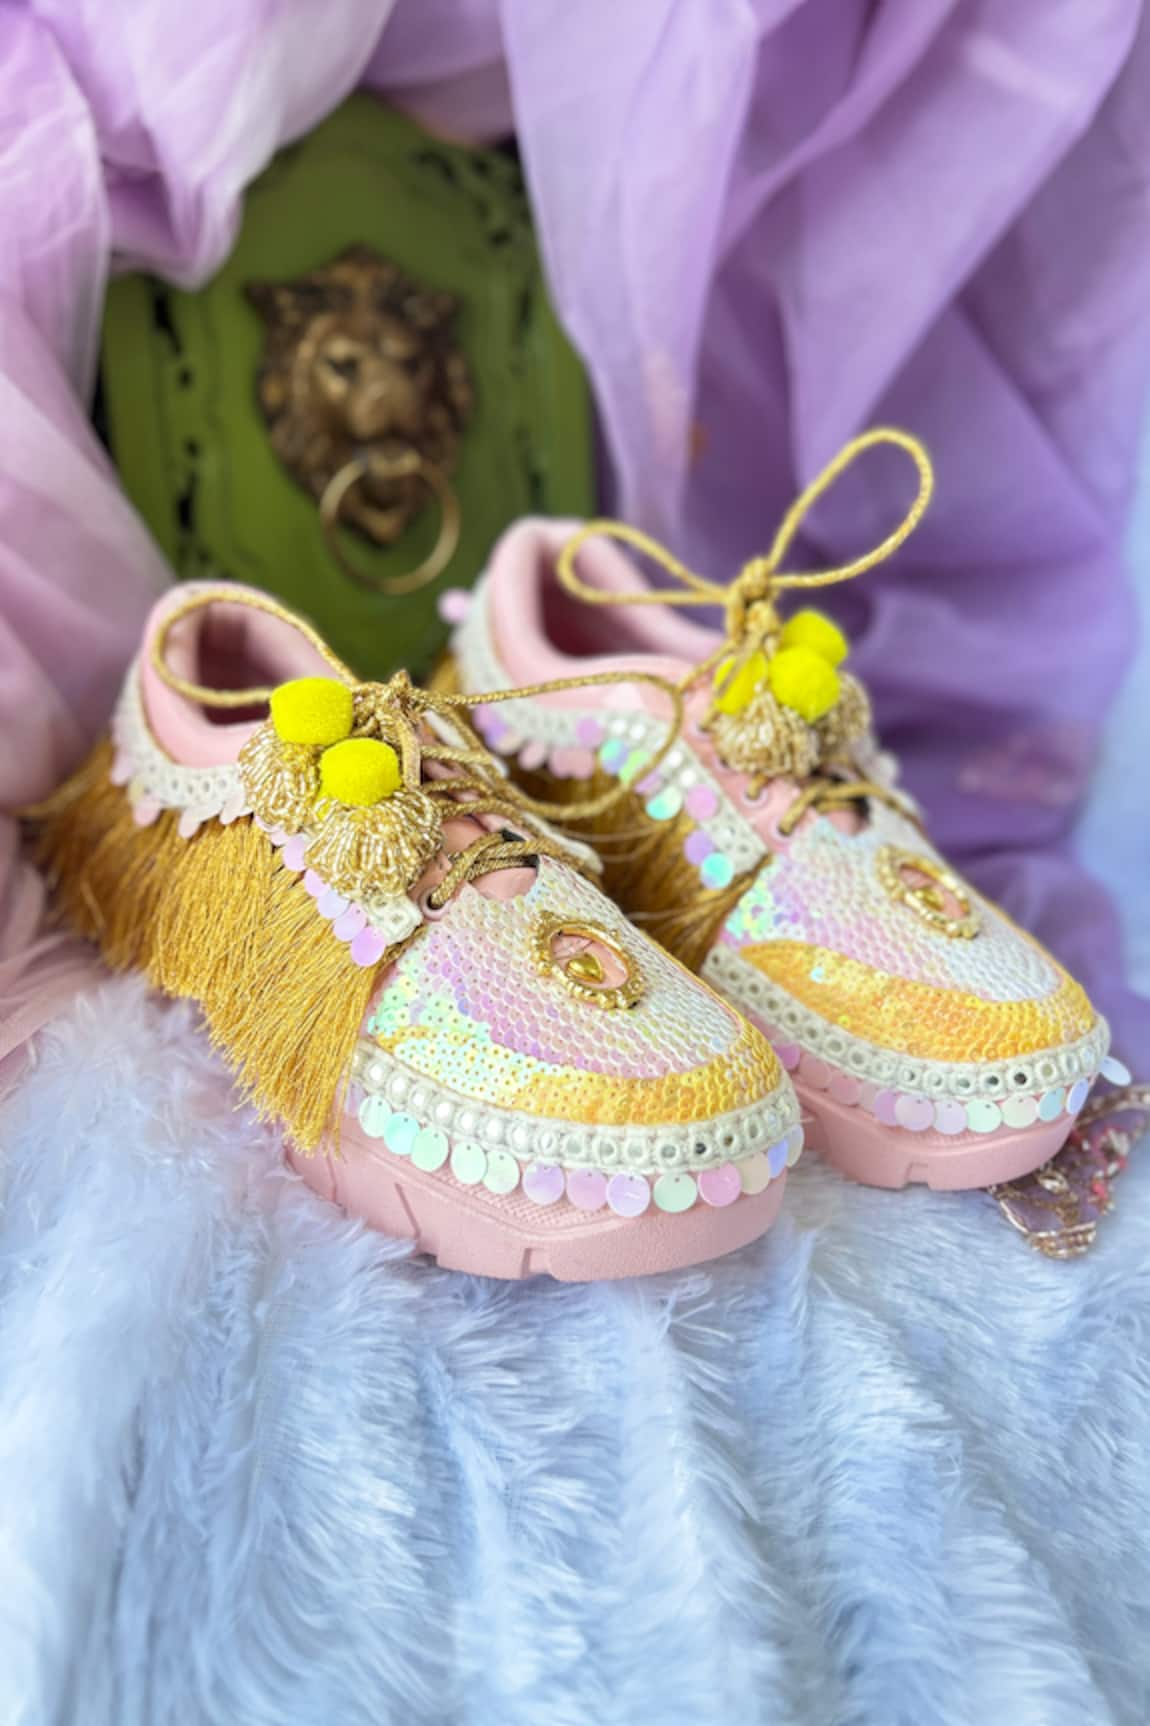 Chal Jooti Princess Candy Tassel Embellished Sneakers